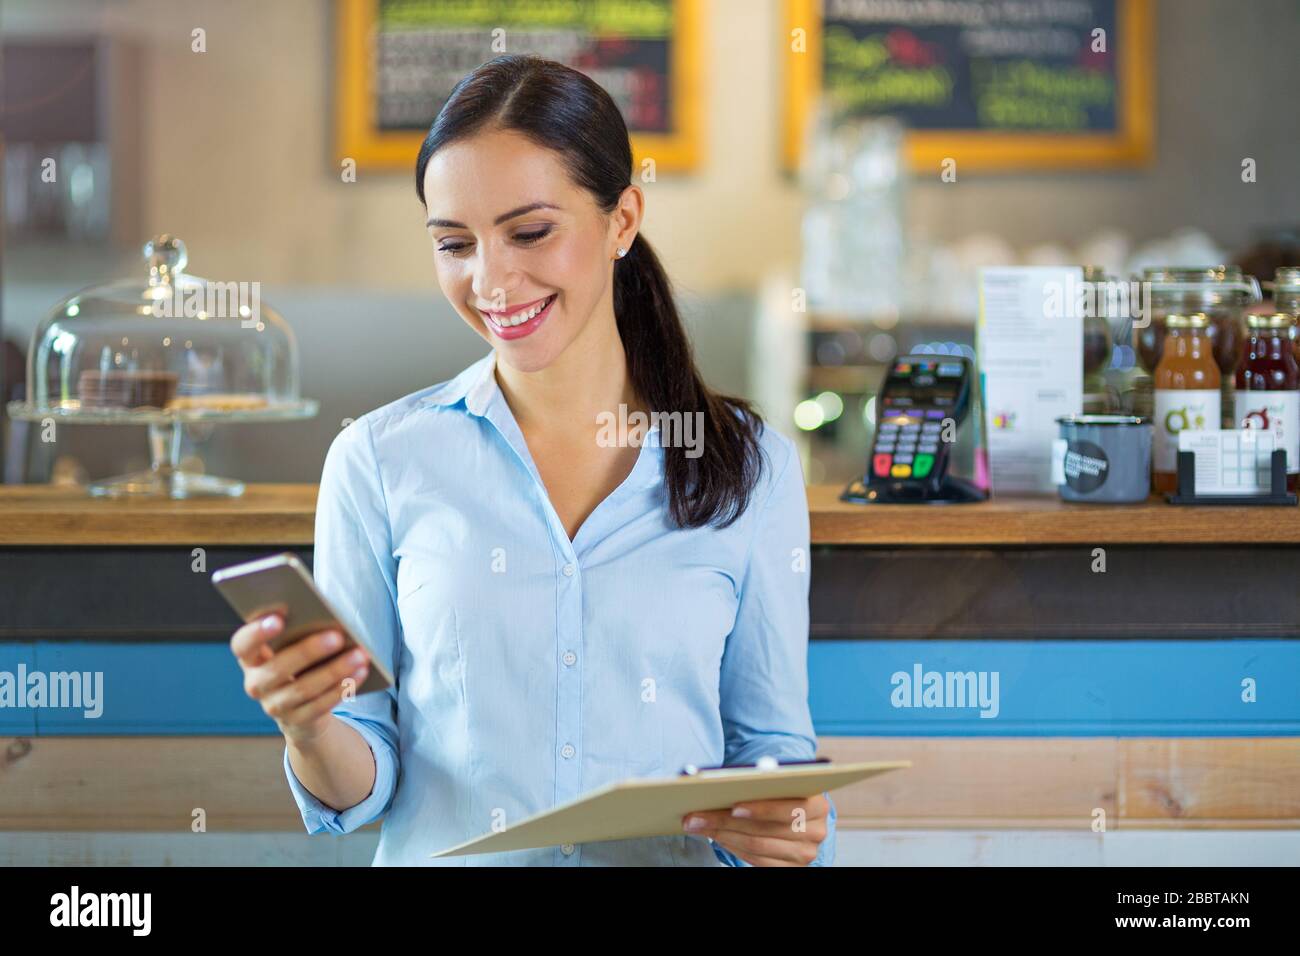 Woman working in coffee shop Banque D'Images